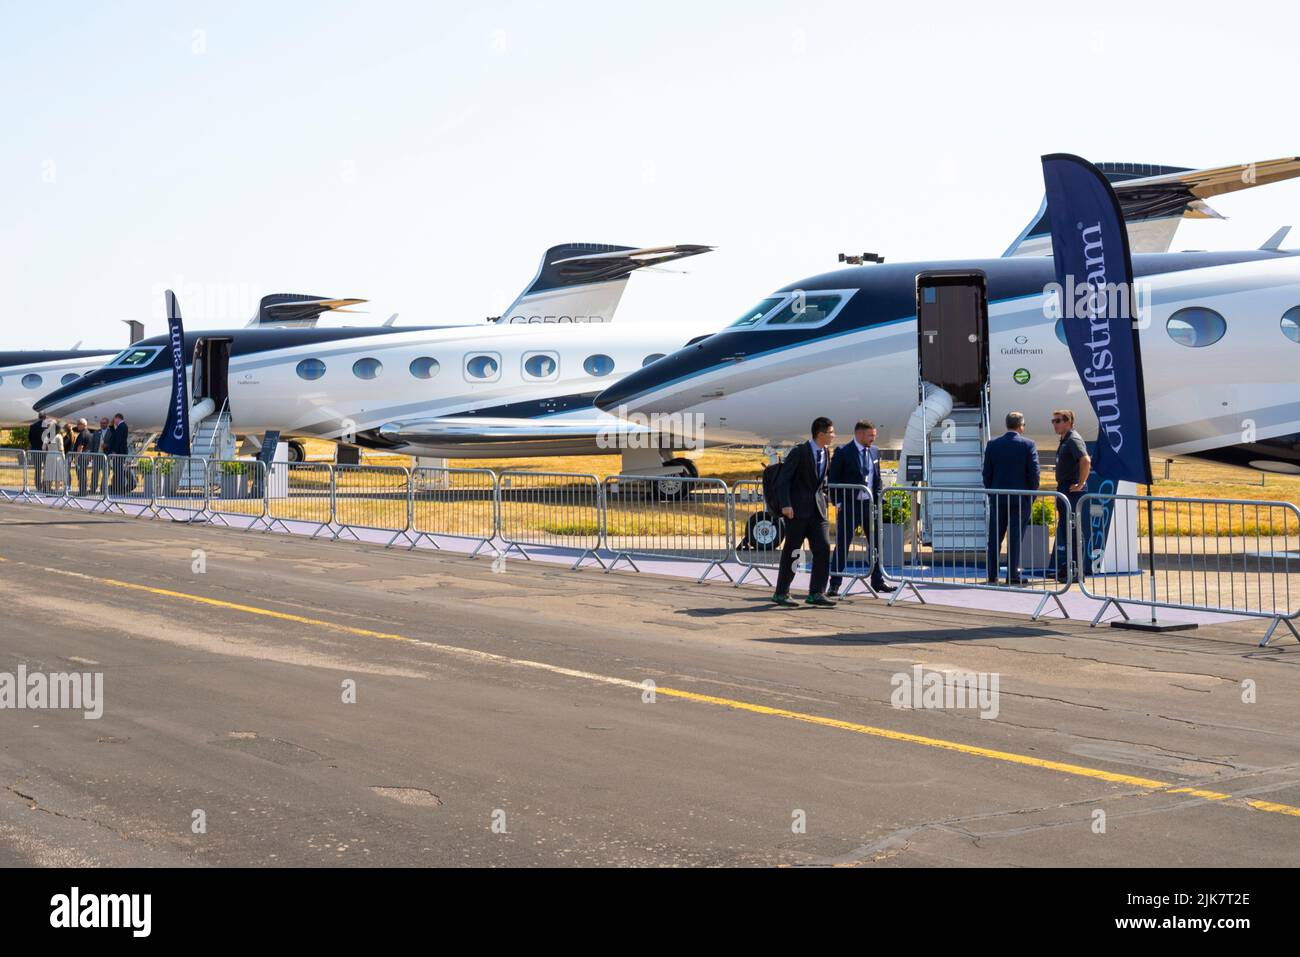 Gulfstream Aerospace corporate jet planes on show at Farnborough International Airshow 2022. Executive jet airplanes on display with representatives Stock Photo